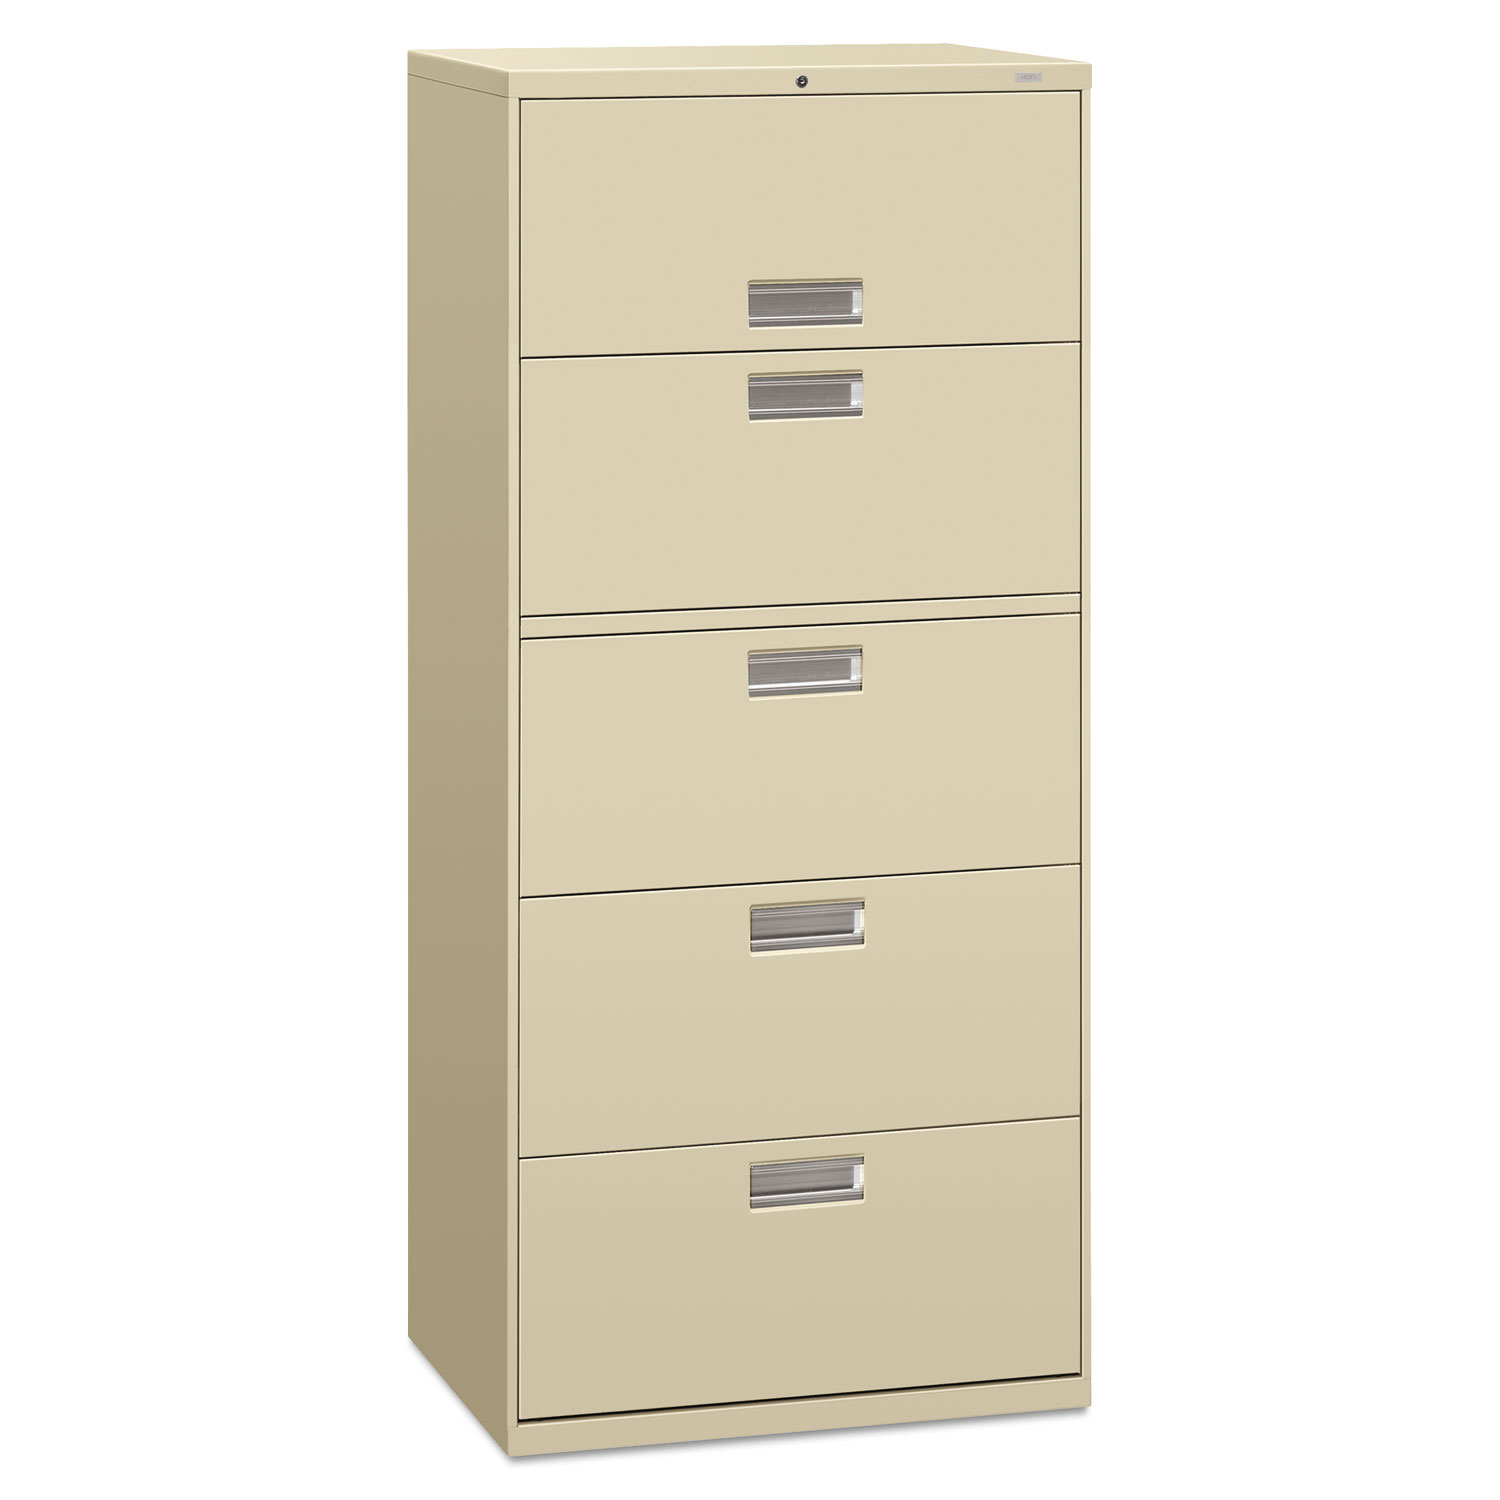 600 Series Five-Drawer Lateral File, 30w x 19-1/4d, Putty